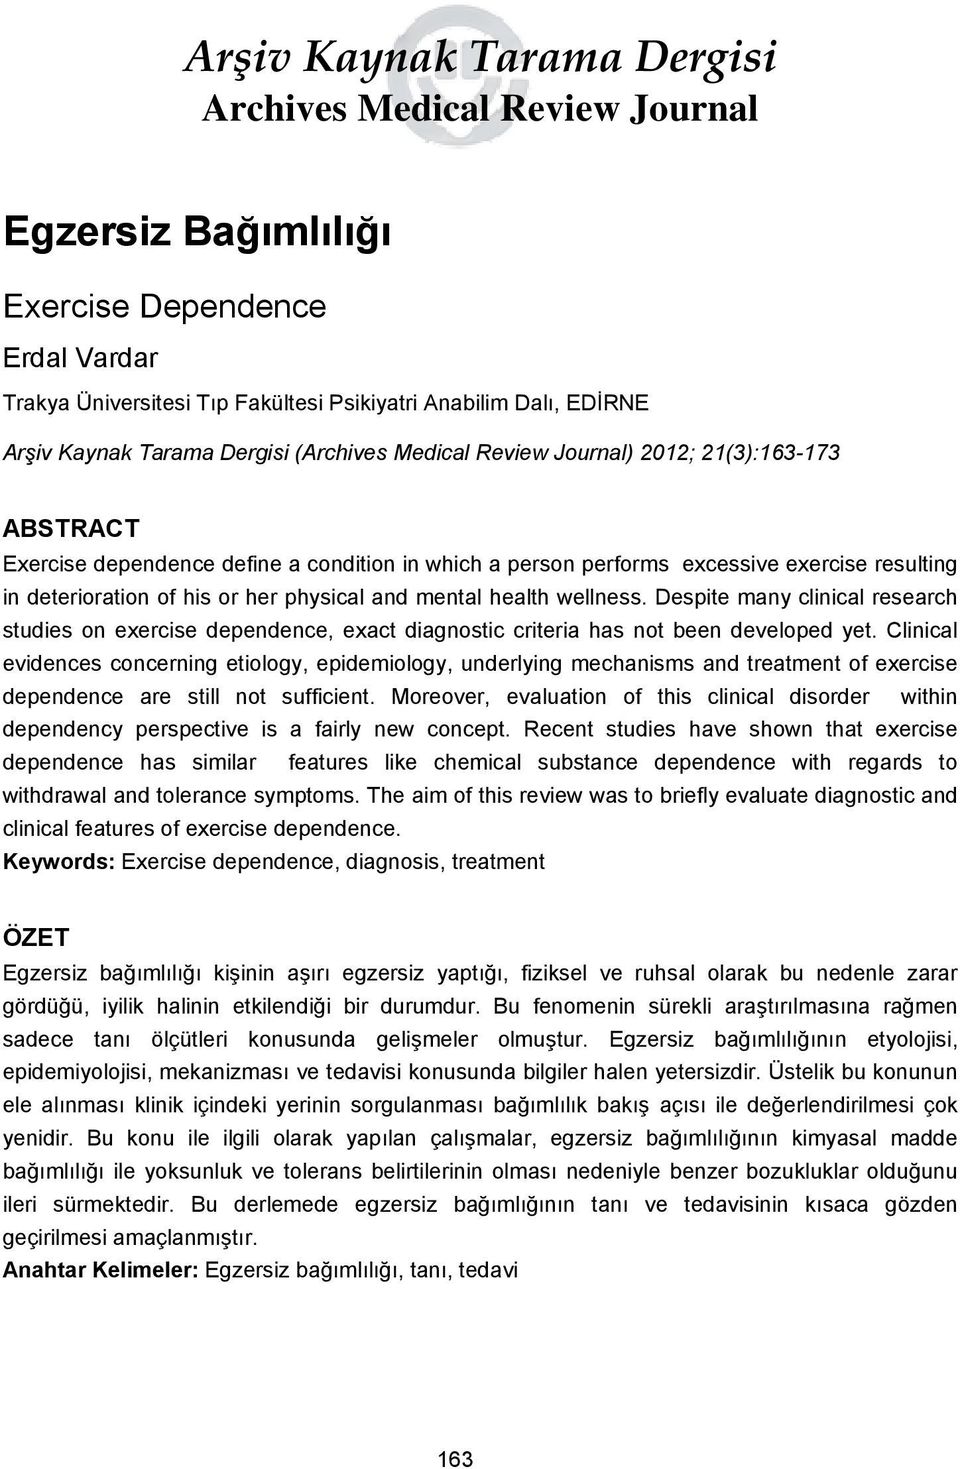 physical and mental health wellness. Despite many clinical research studies on exercise dependence, exact diagnostic criteria has not been developed yet.